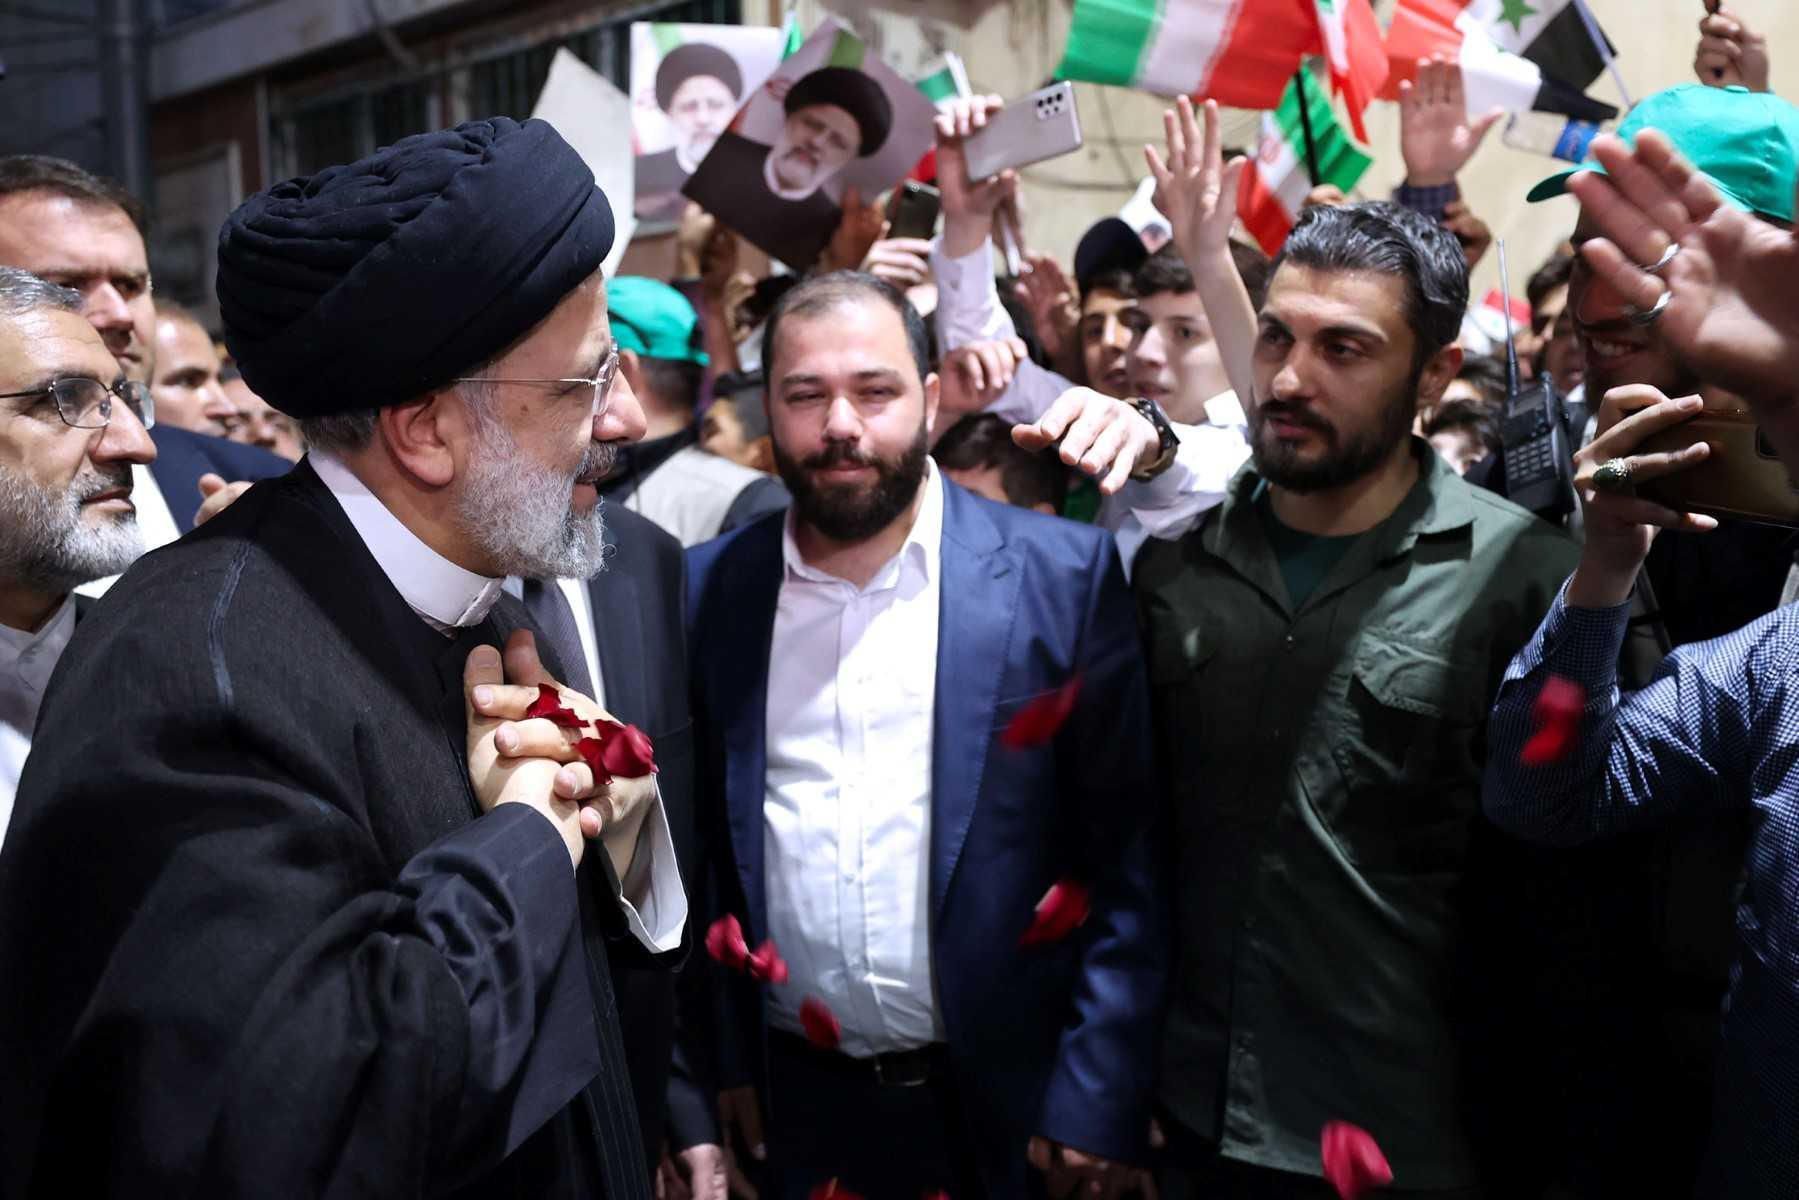 A handout picture provided by the Iranian presidency on May 4, shows Iranian President Ebrahim Raisi (left) greeting a group of men during his visit to the holy shrine of Sayyida Zaynab in the southern suburbs of Damascus. Photo: AFP 